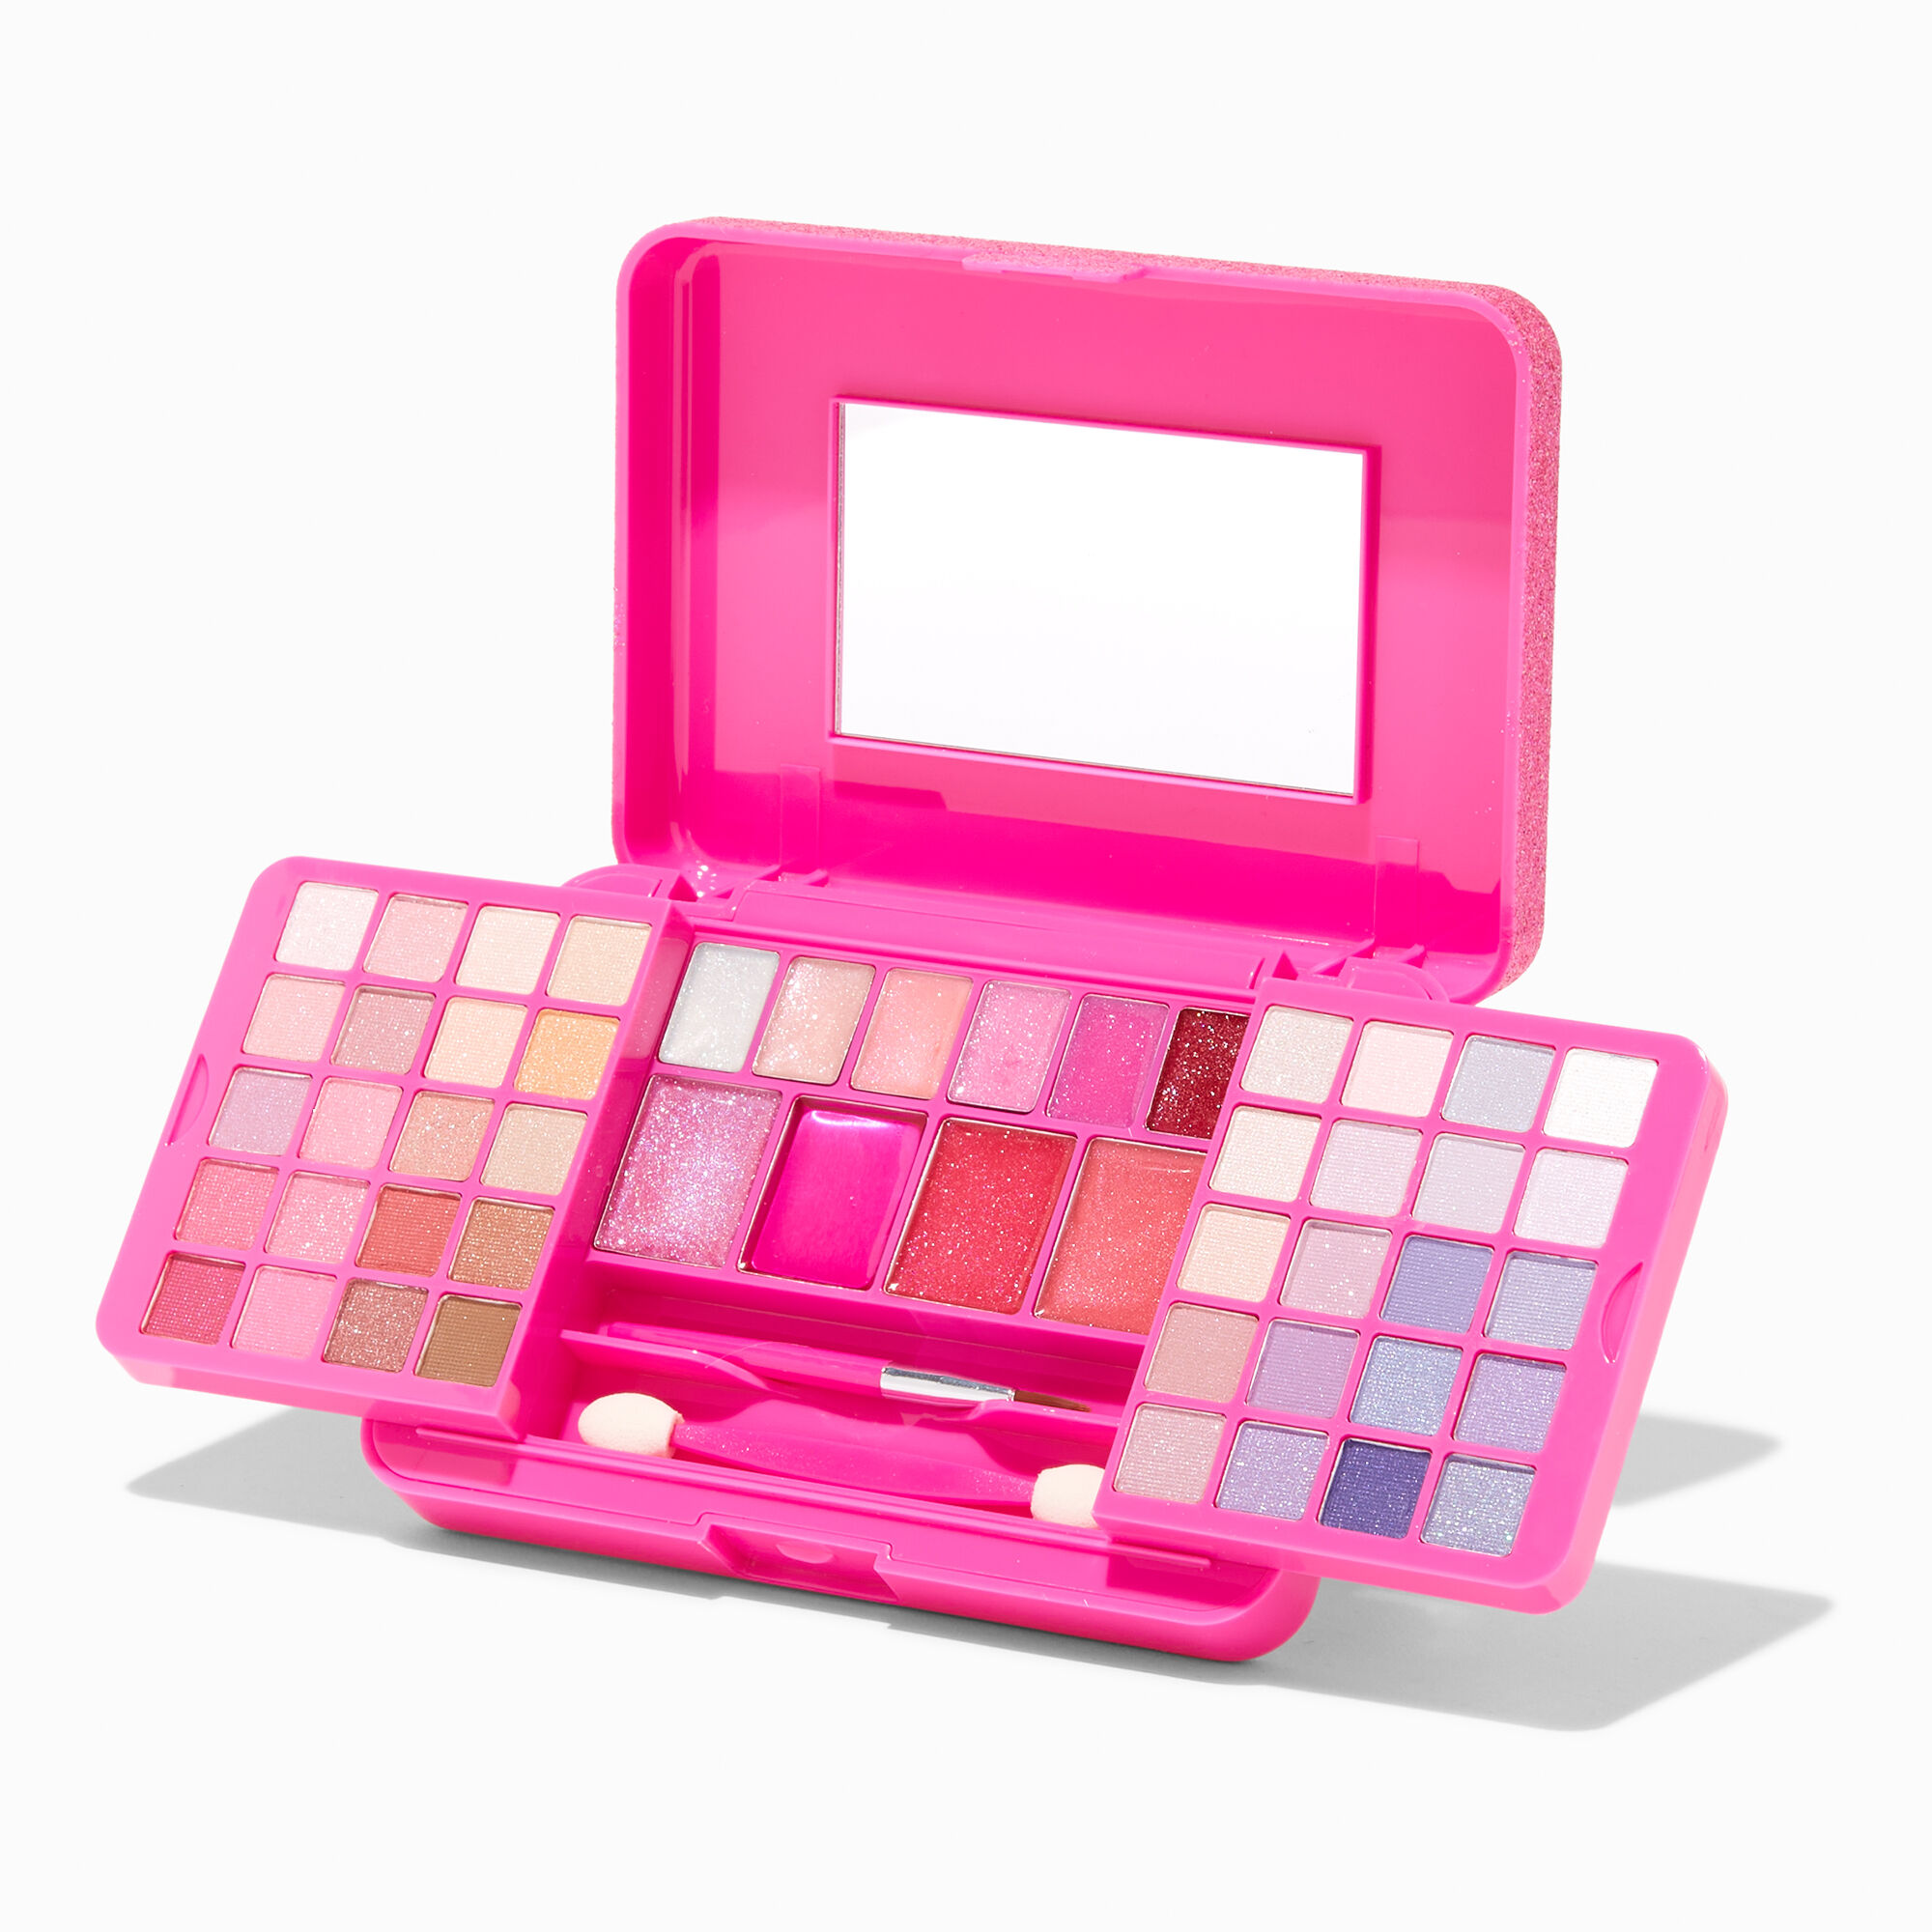 View Claires Glitter Makeup Set Pink information